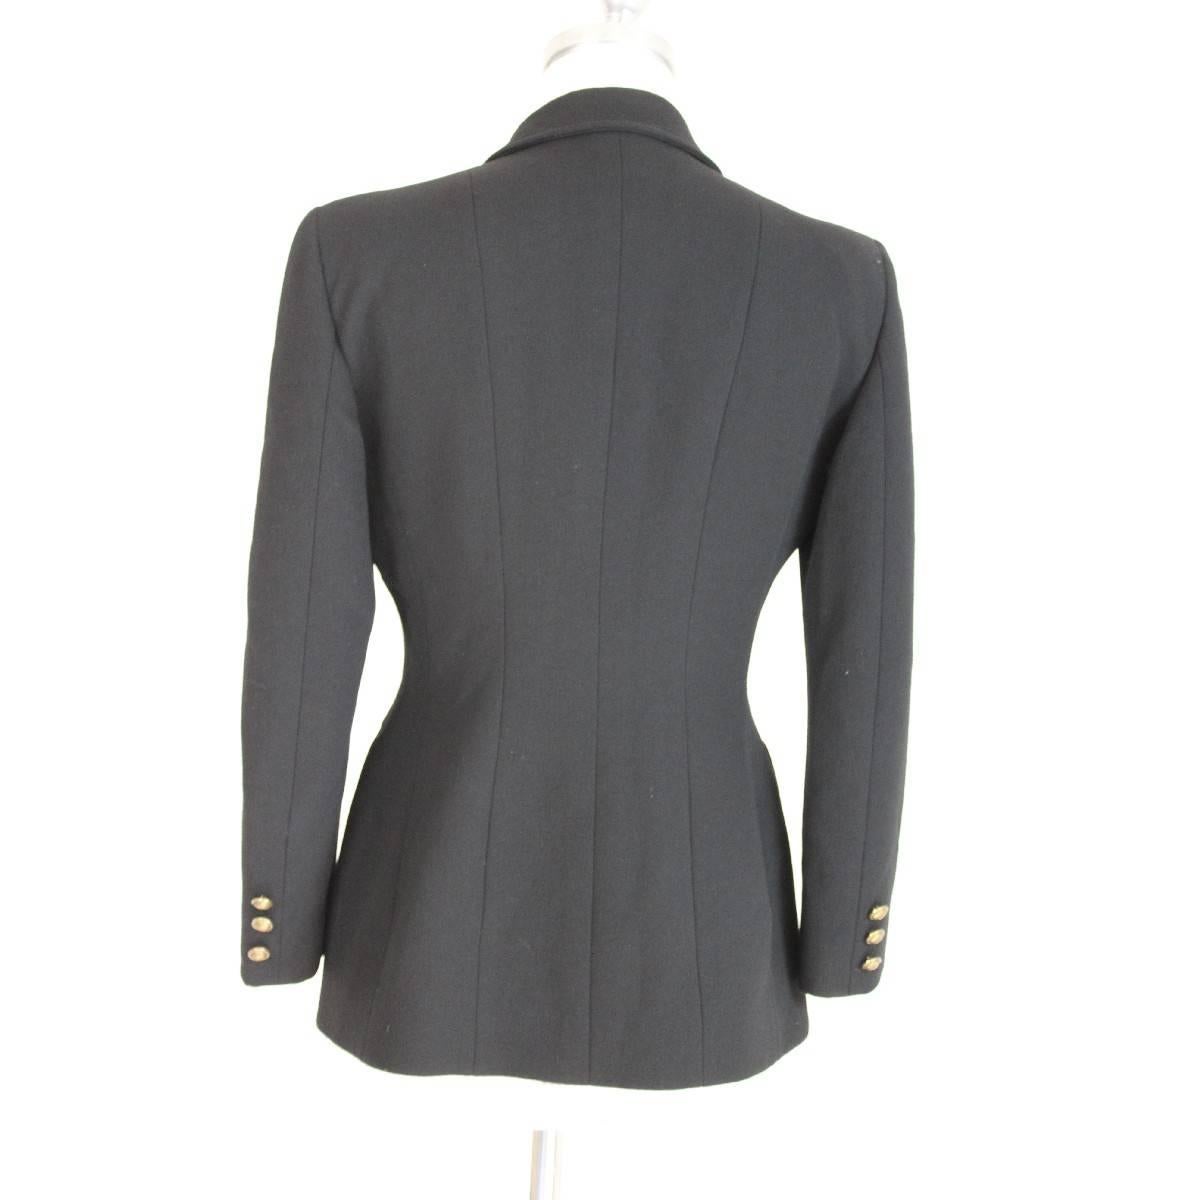 Black Moschino Cheap and Chic vintage 1990s black jacket women size 44 slim fit For Sale